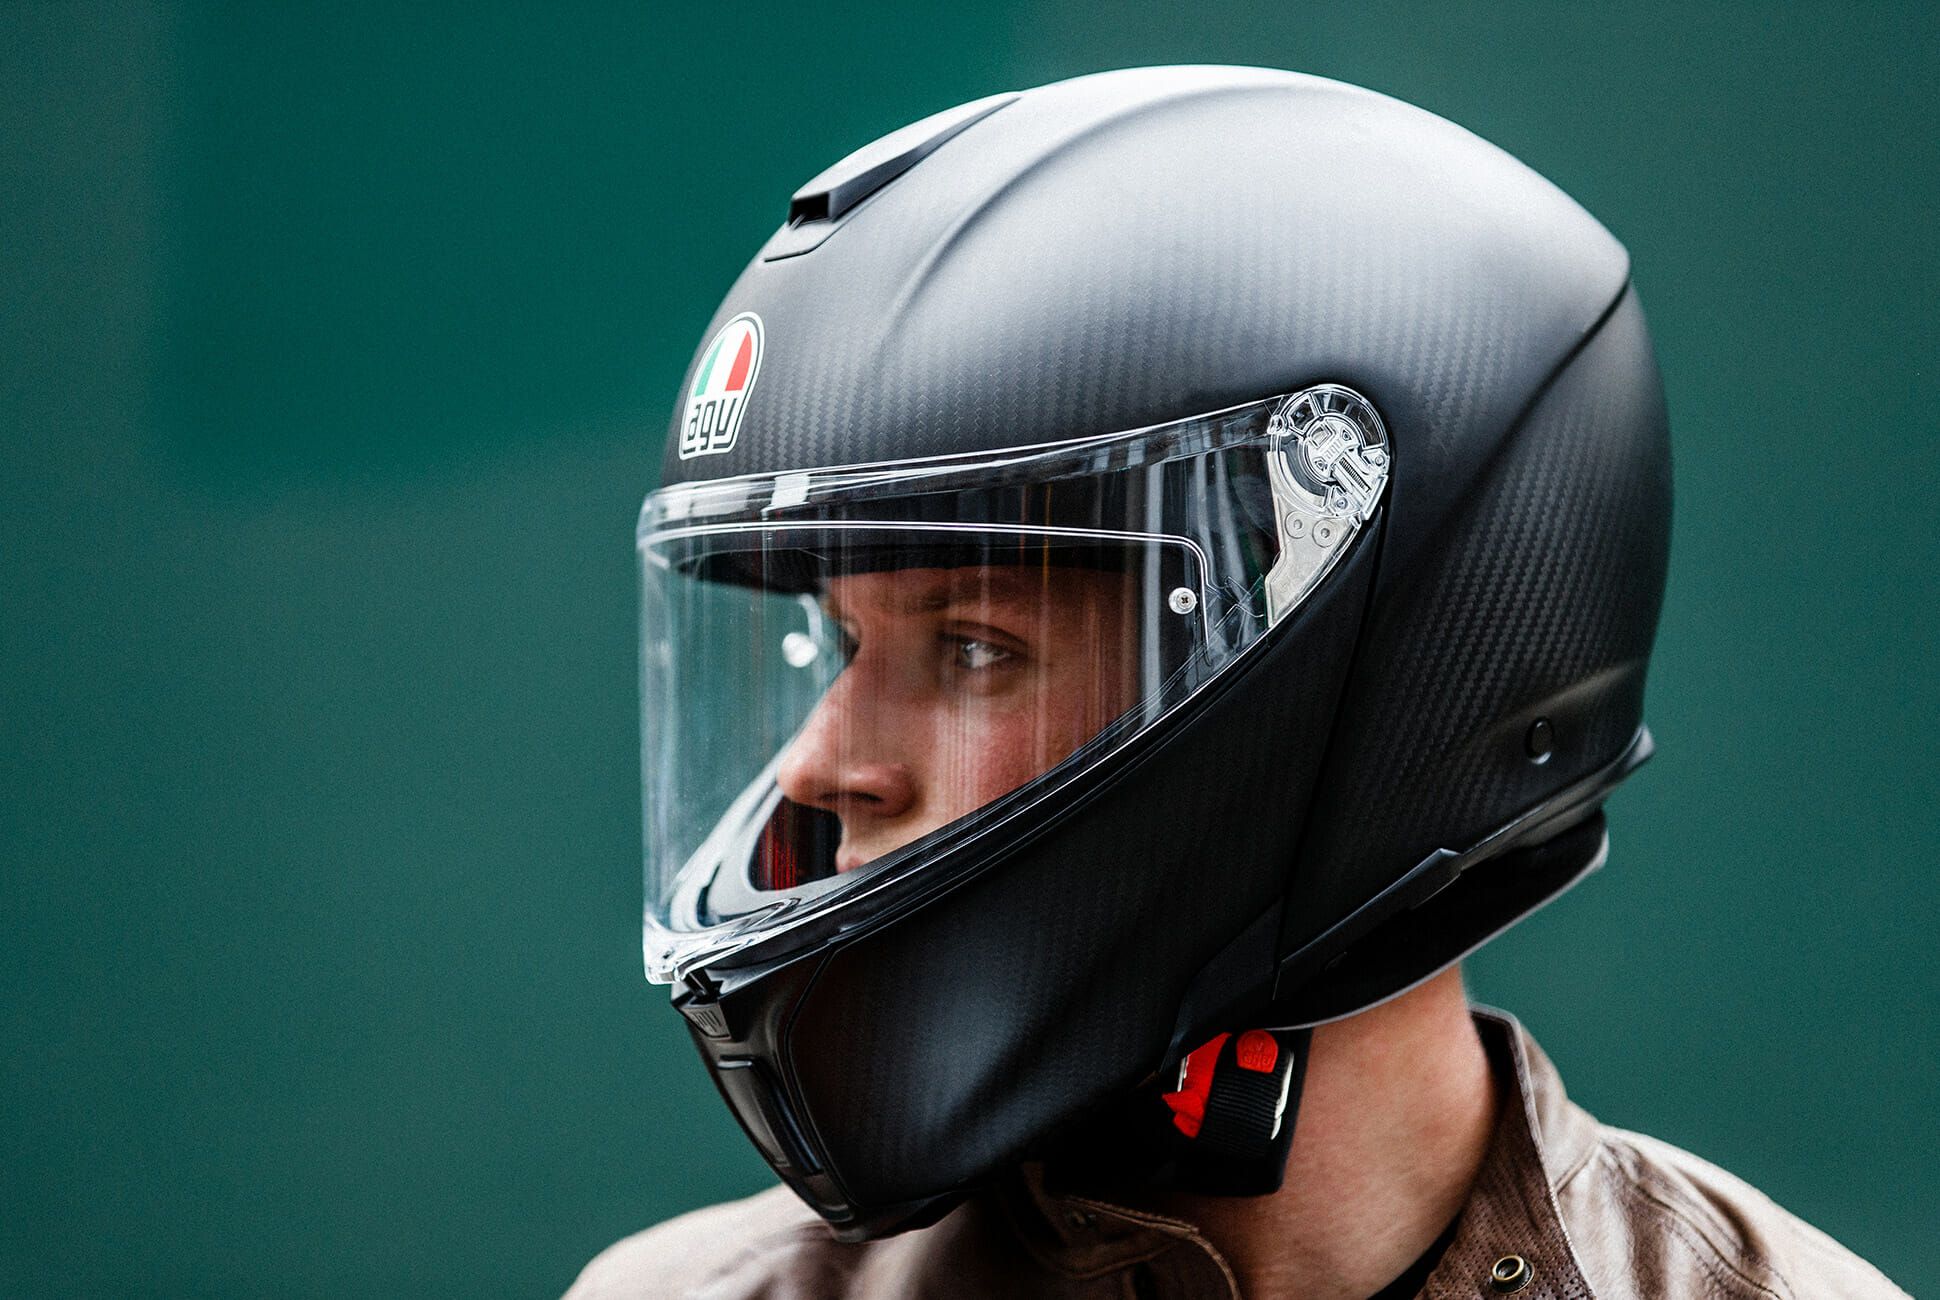 Be Sure to Look at the Reviews When Choosing a Motorcycle Helmet Online